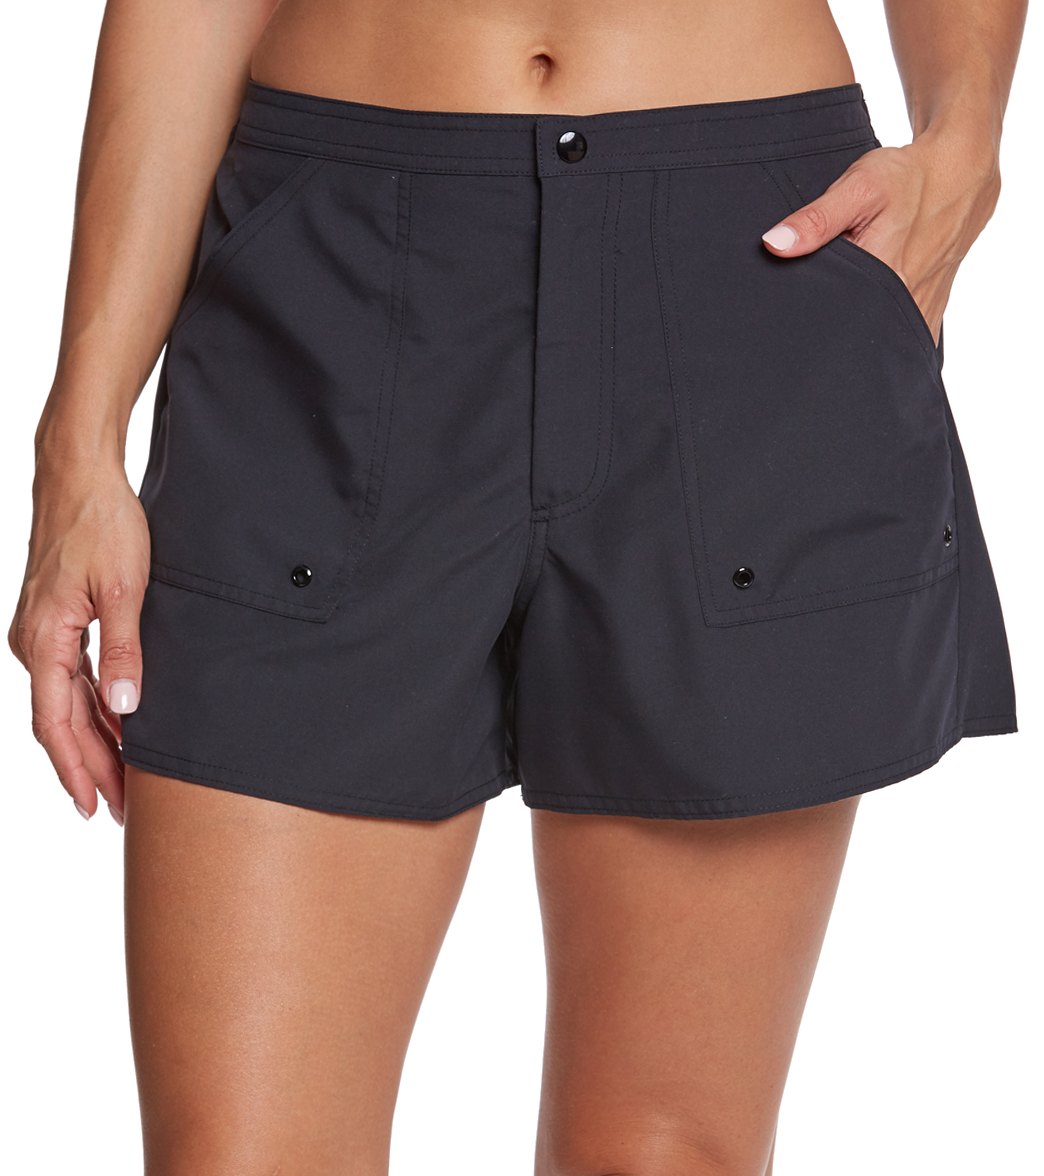 Maxine Solids Woven Board Shorts - Black 8 Polyester - Swimoutlet.com